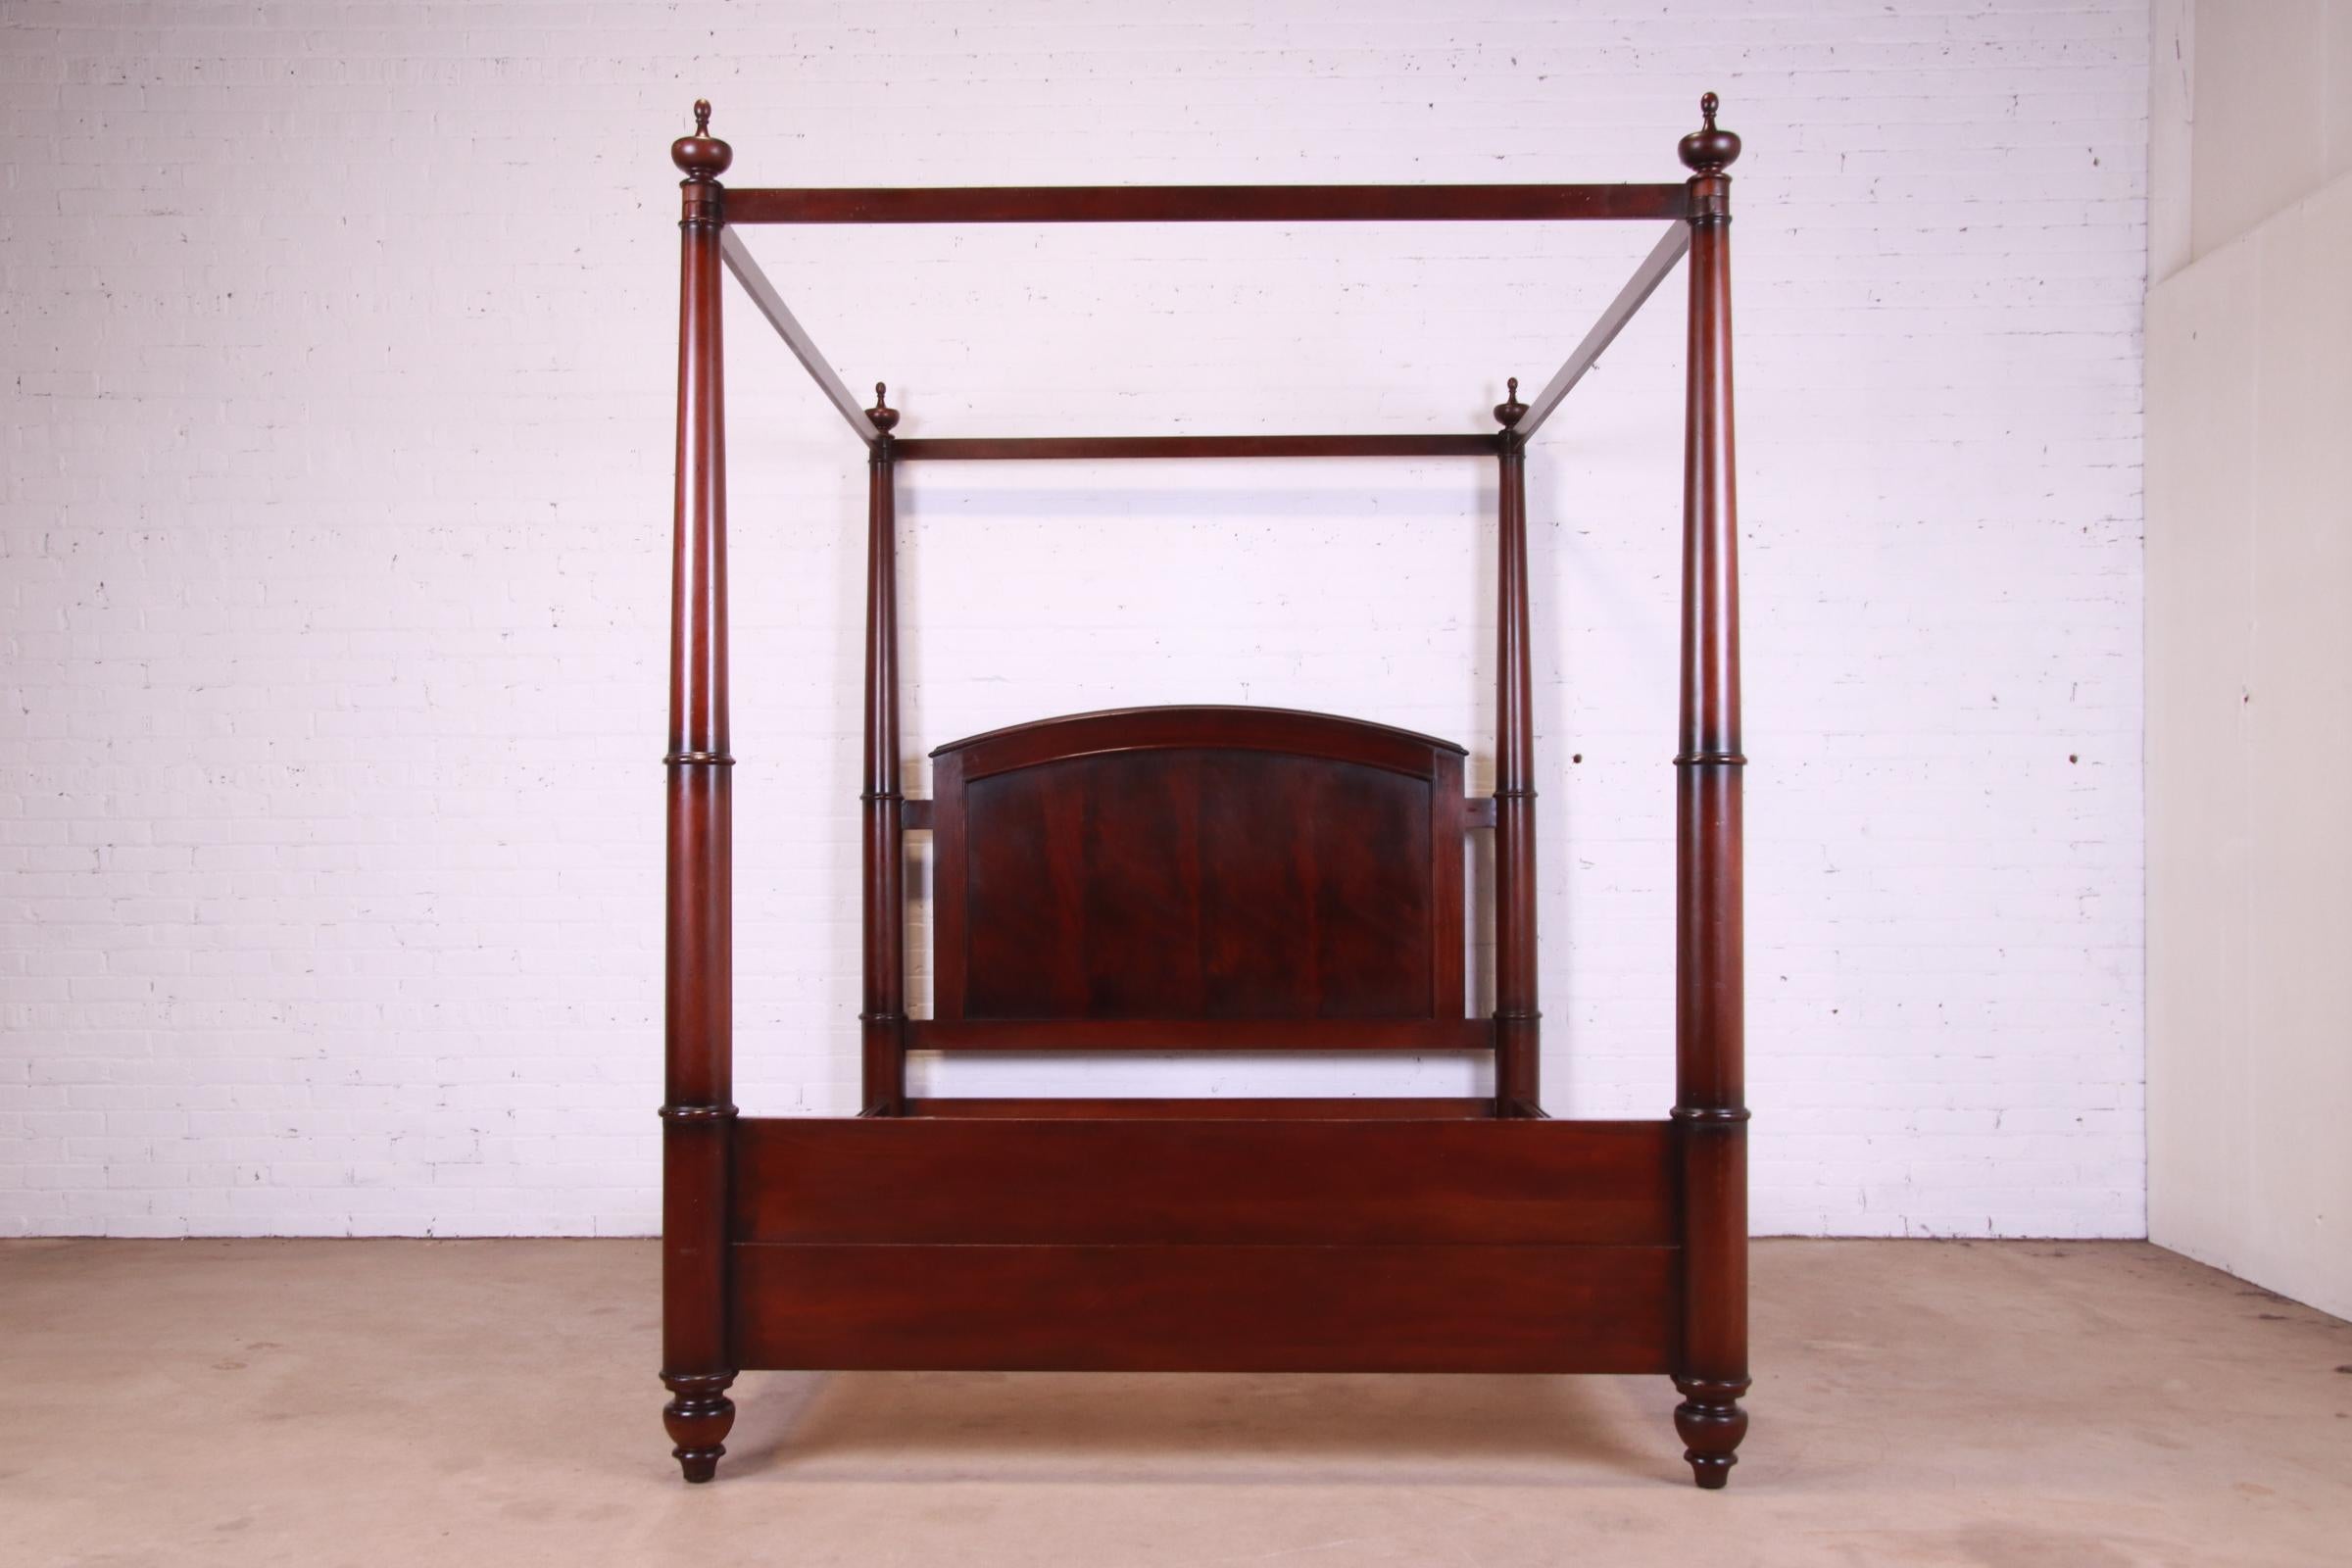 bombay company four poster bed